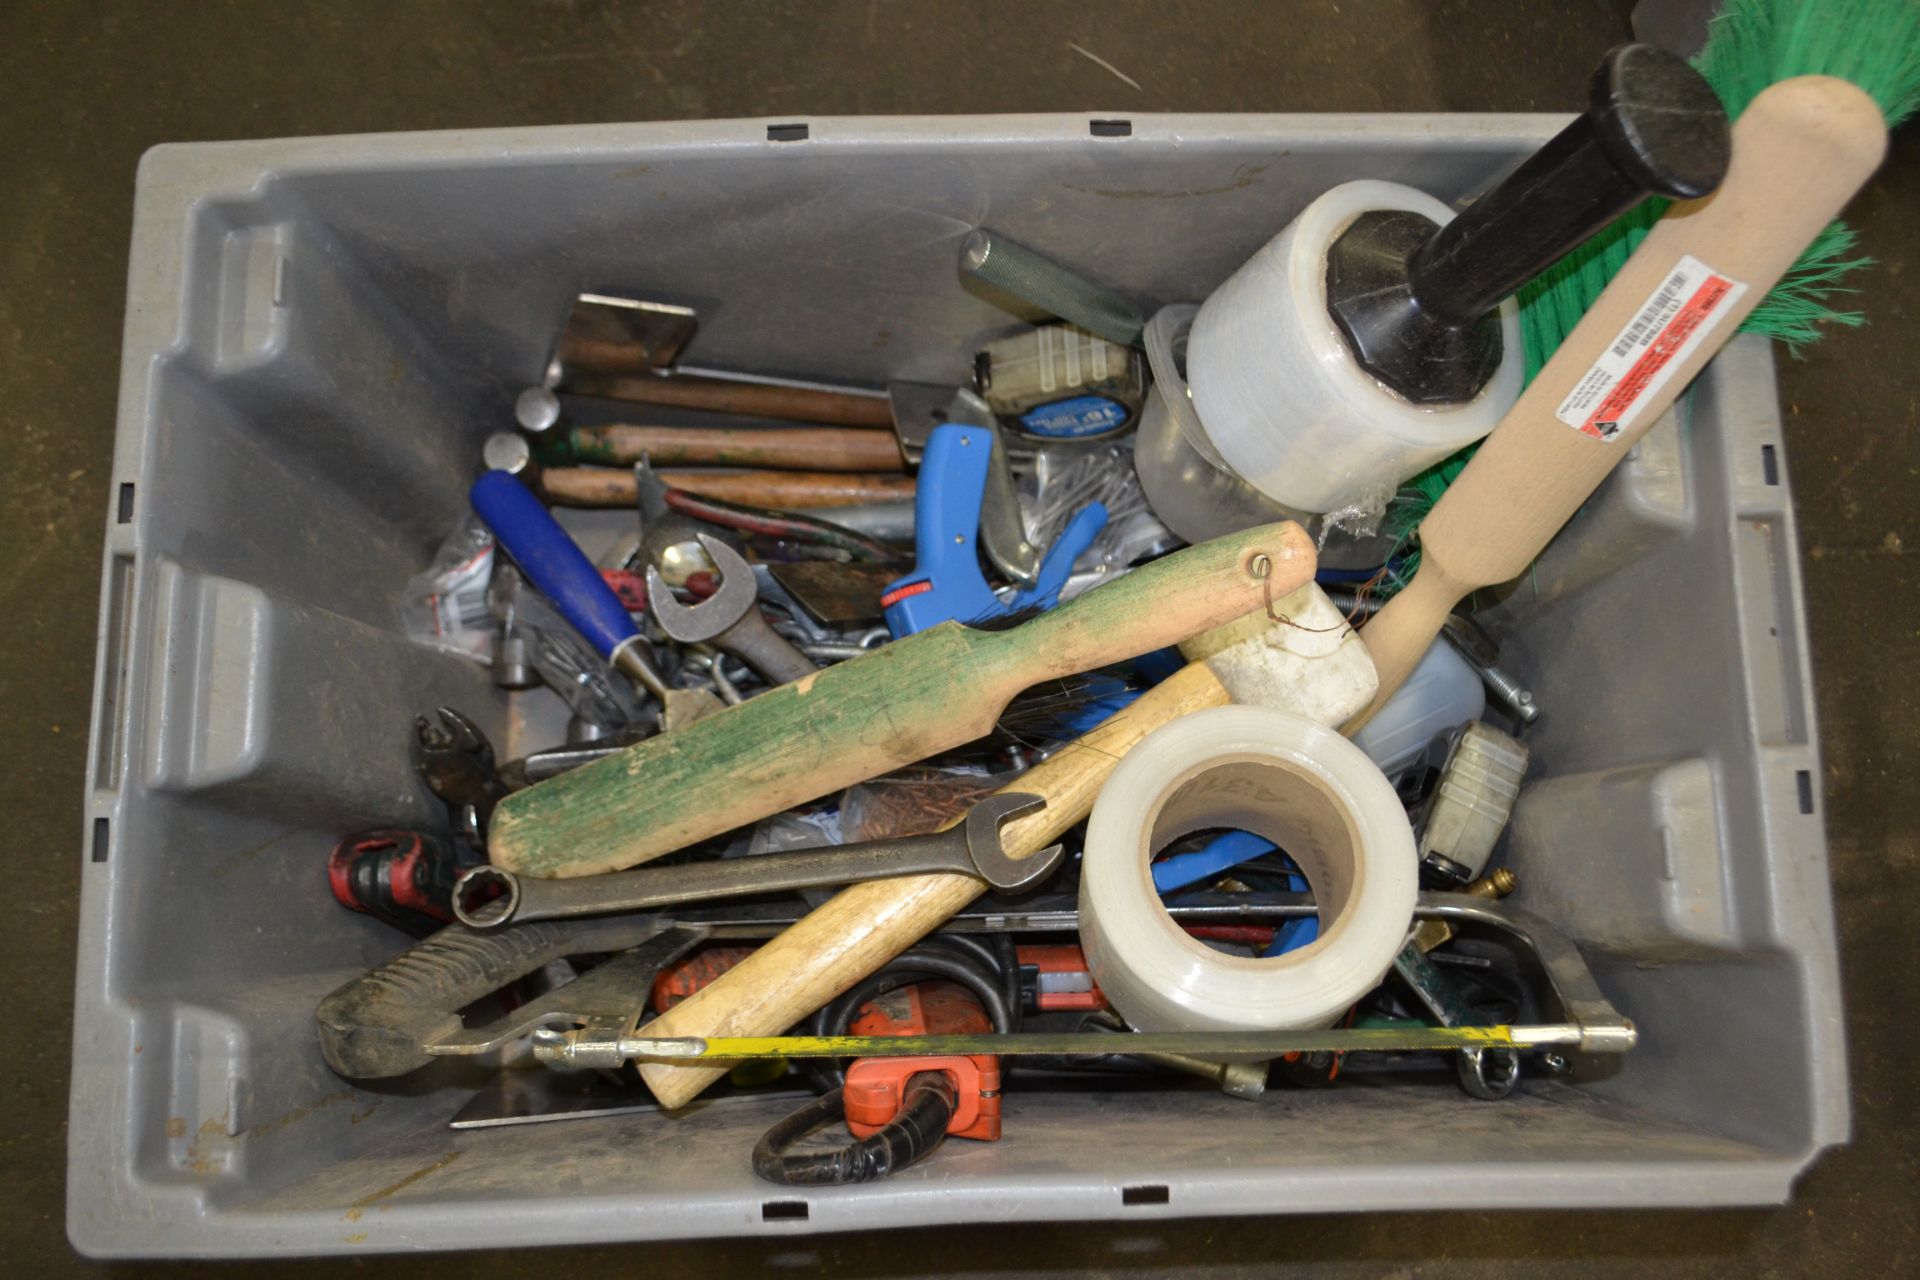 Bin of Assorted Hand Tools, hammers, tape measures, saws, brushes, hardware etc - Image 2 of 2